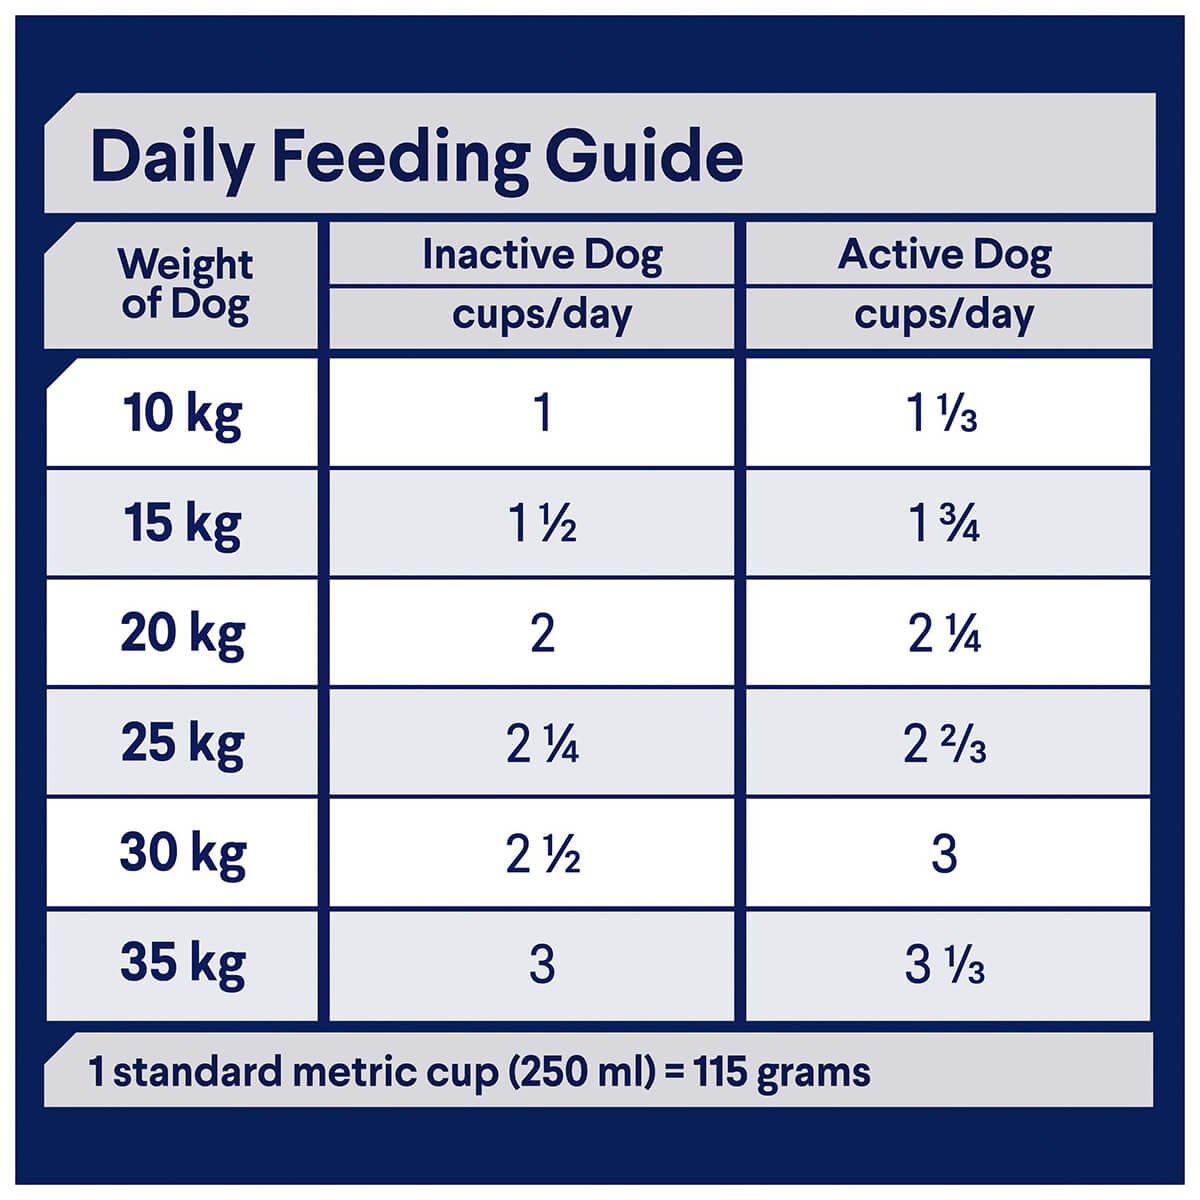 Advance Active Adult Chicken with Rice Dry Dog Food 13kg (100000004159) [default_color]